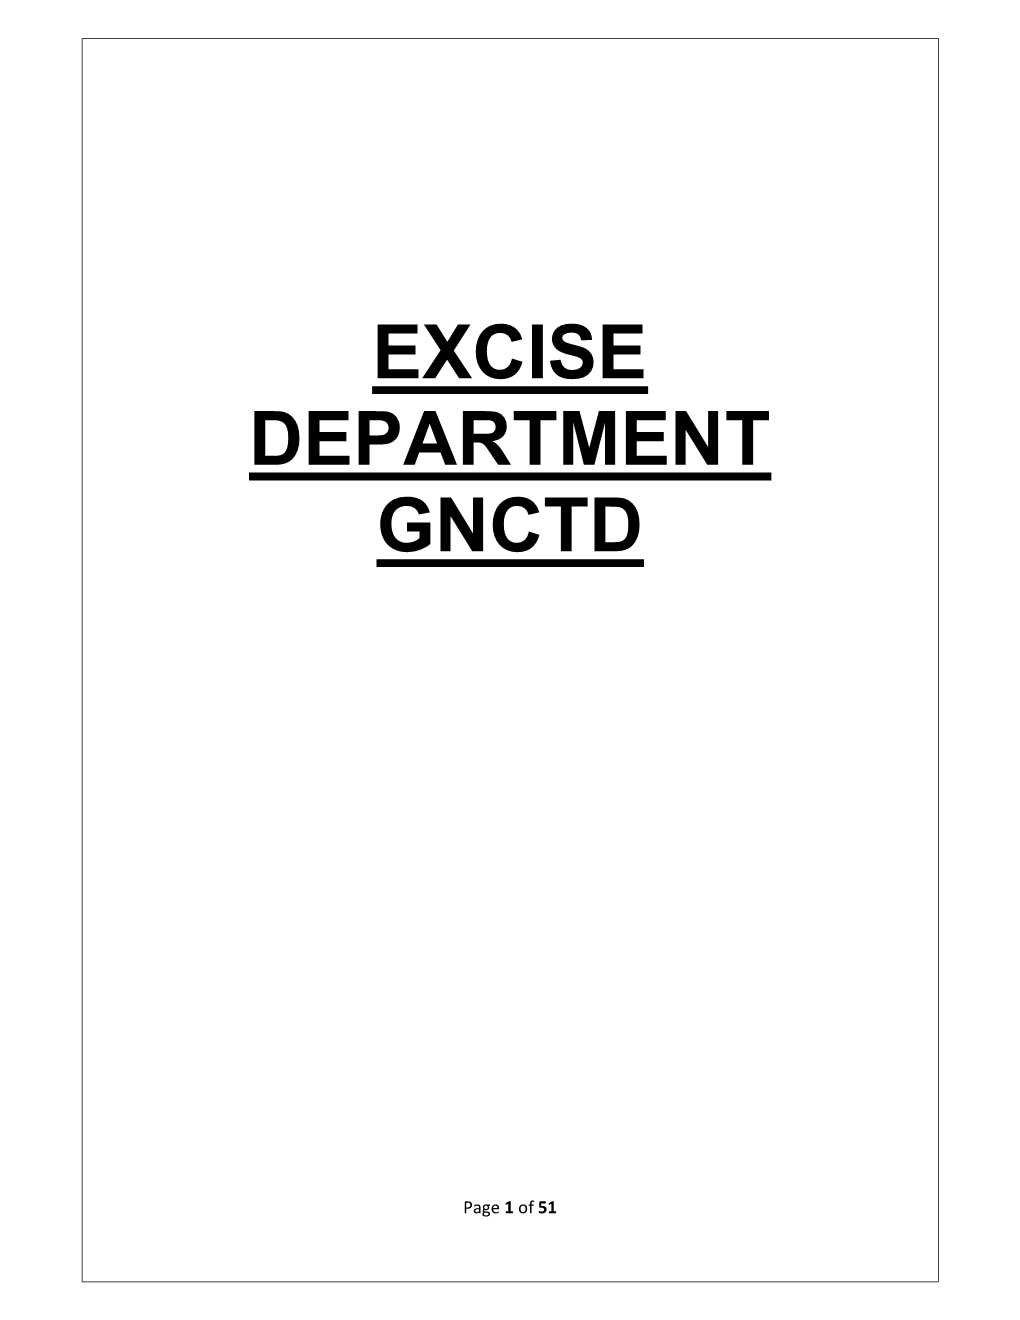 Excise Department Gnctd